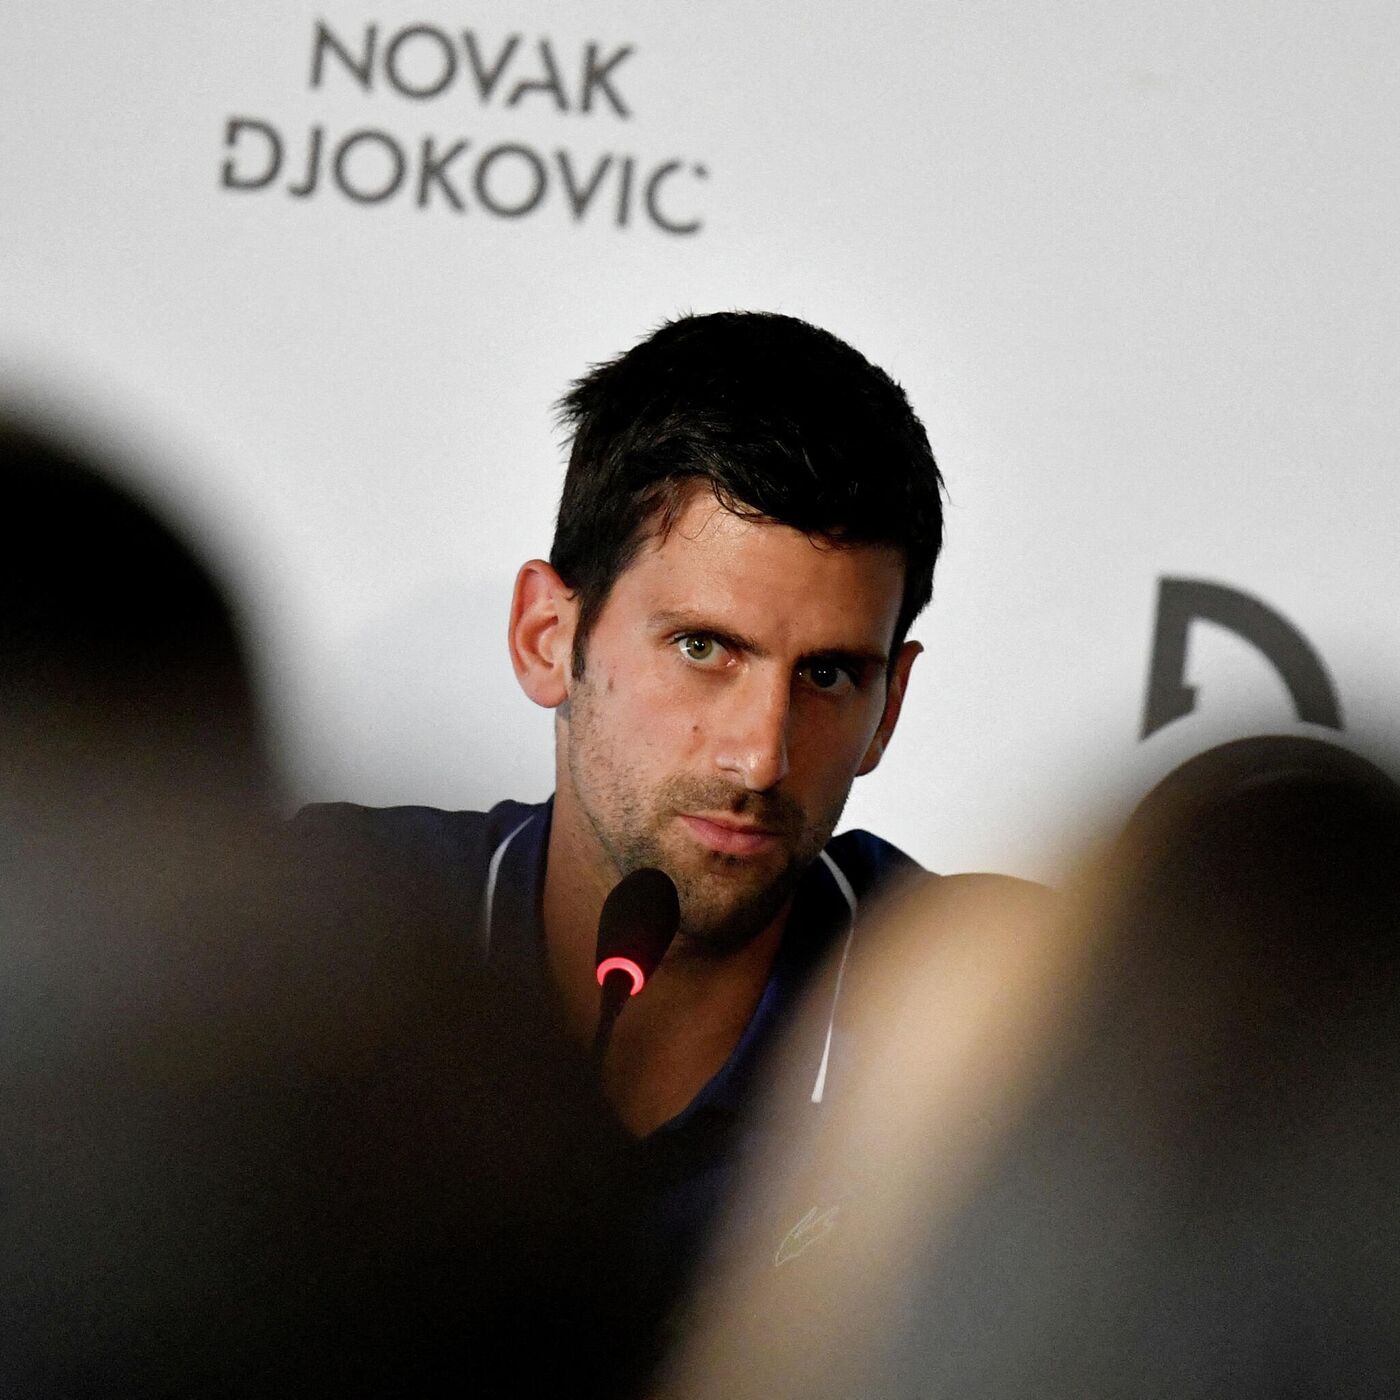 Hijackers Interrupt Livestreamed Djokovic Court Hearing With Loud Music and Porn